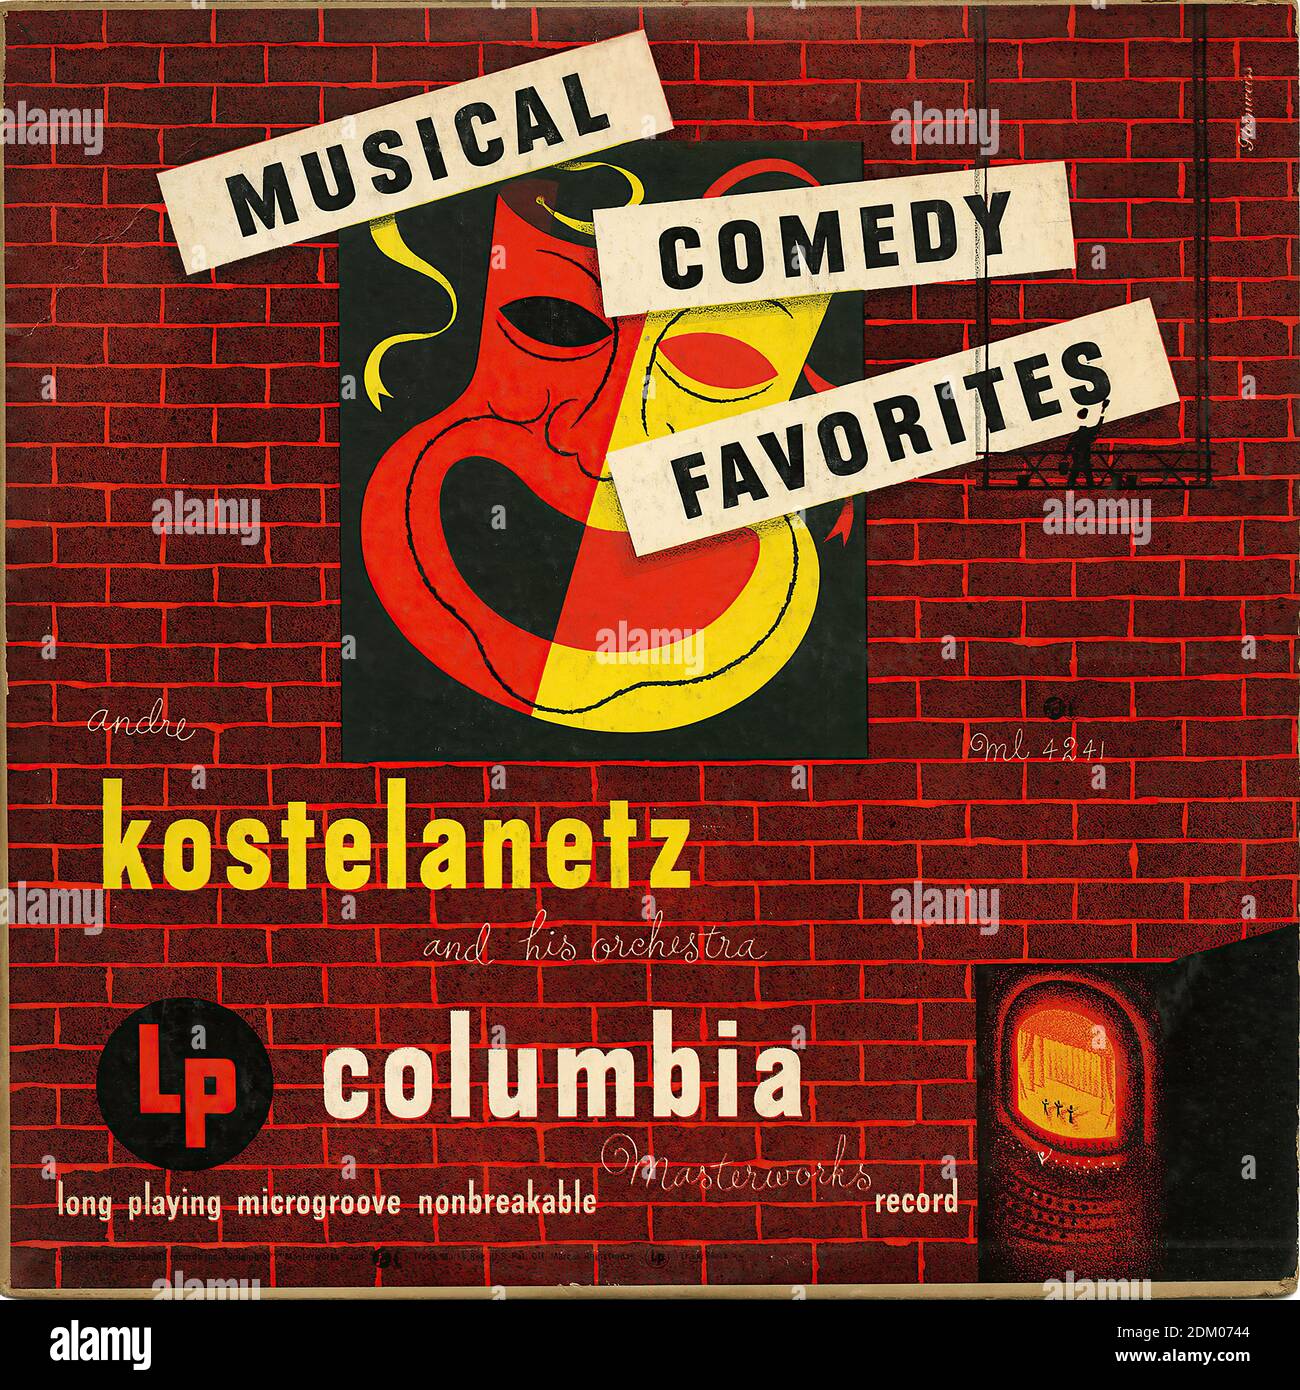 Musical Comedy Favourites - Vintage Record Cover Stockfoto